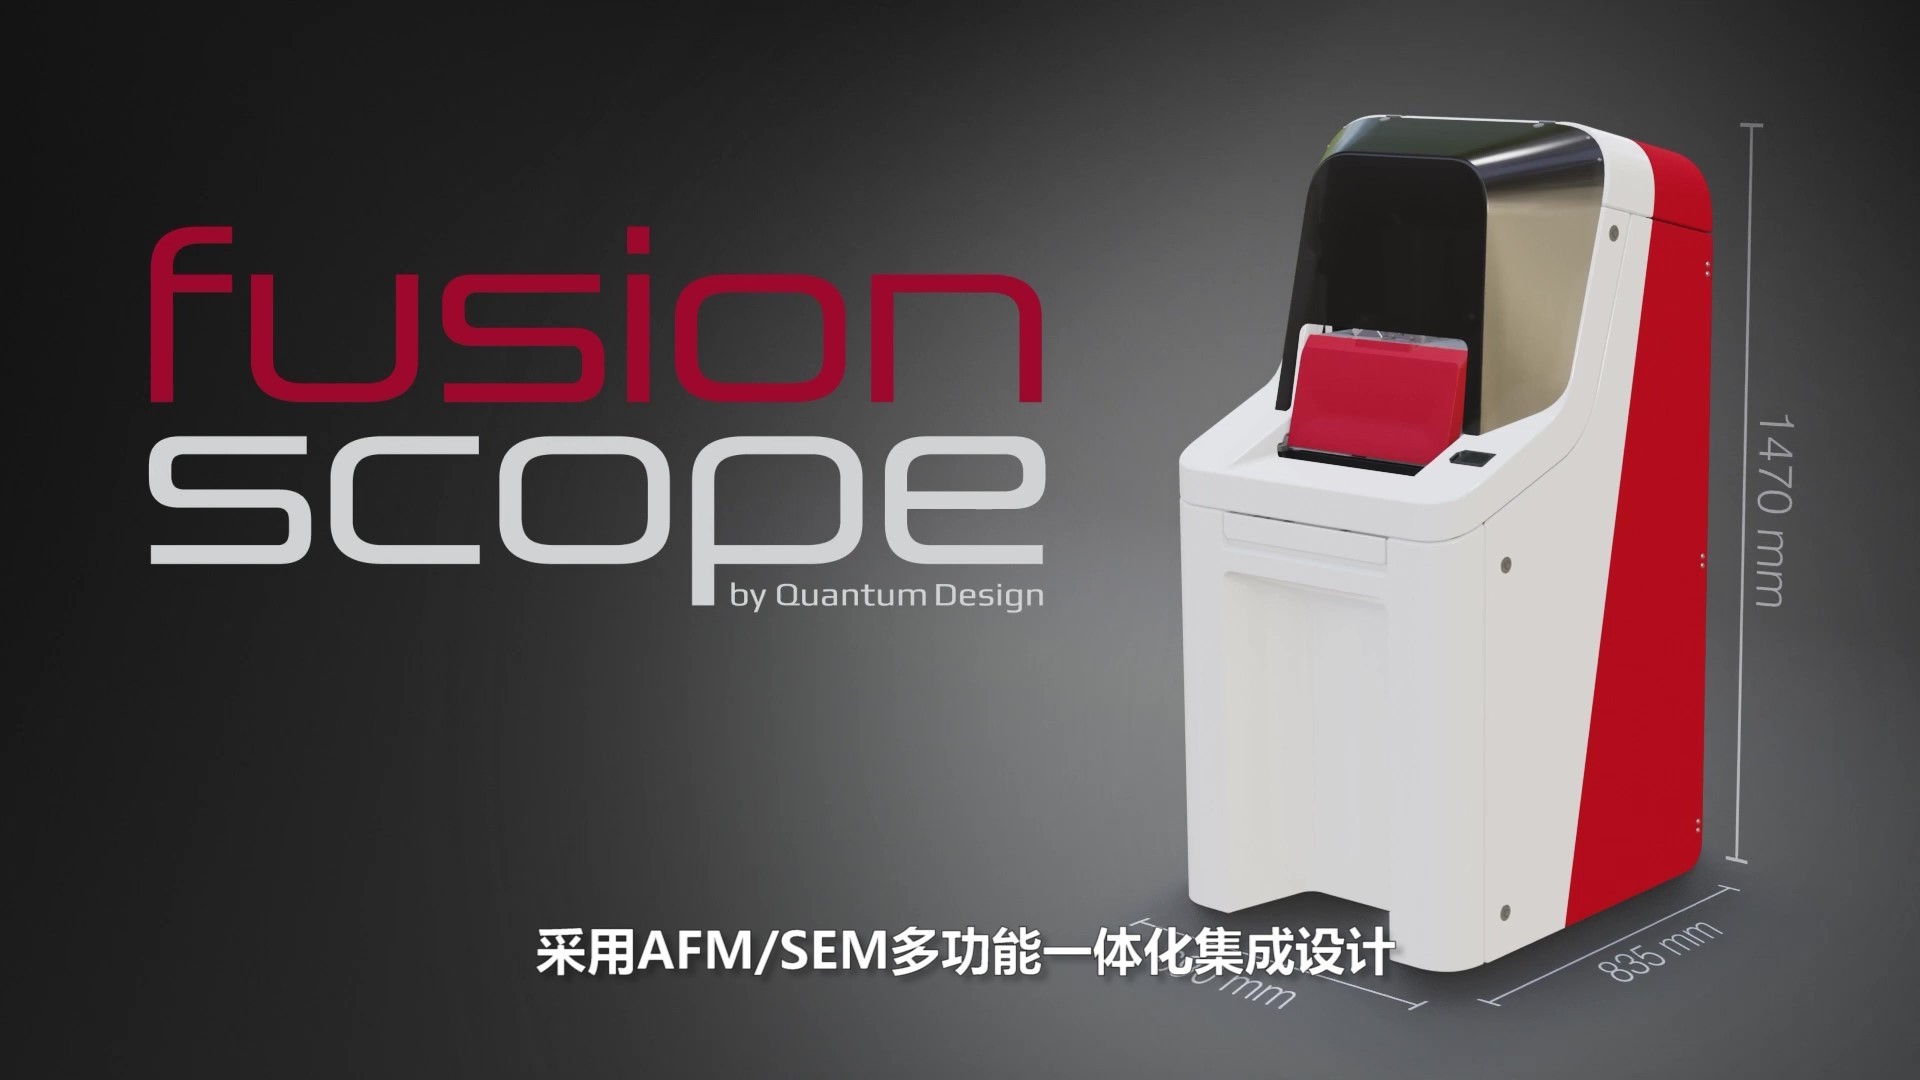 FusionScope多功能显微镜